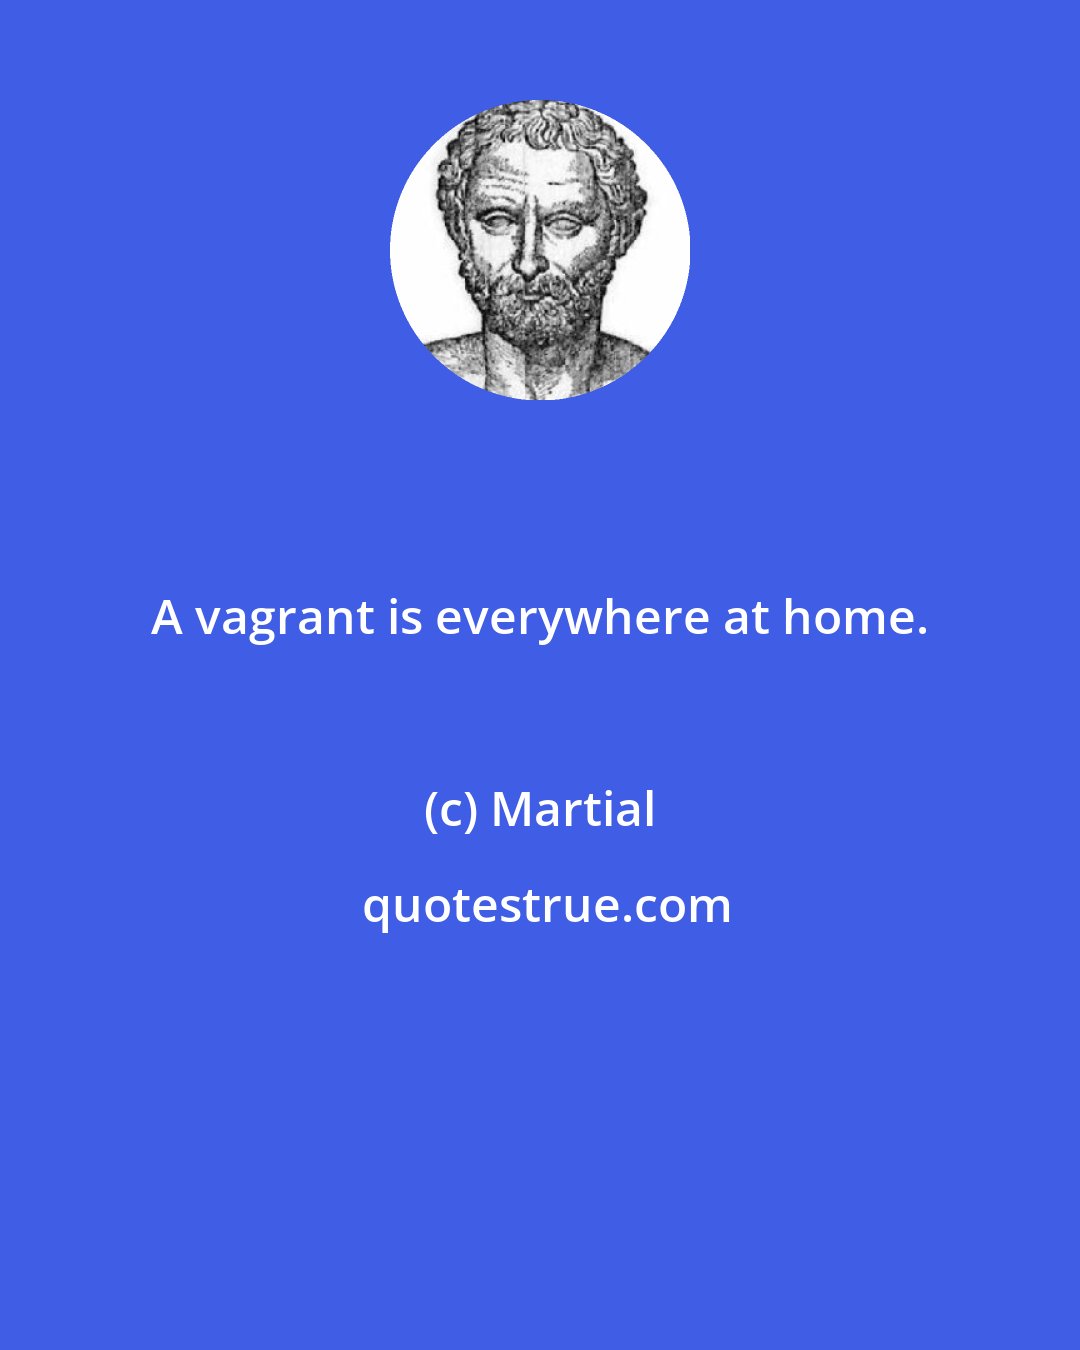 Martial: A vagrant is everywhere at home.